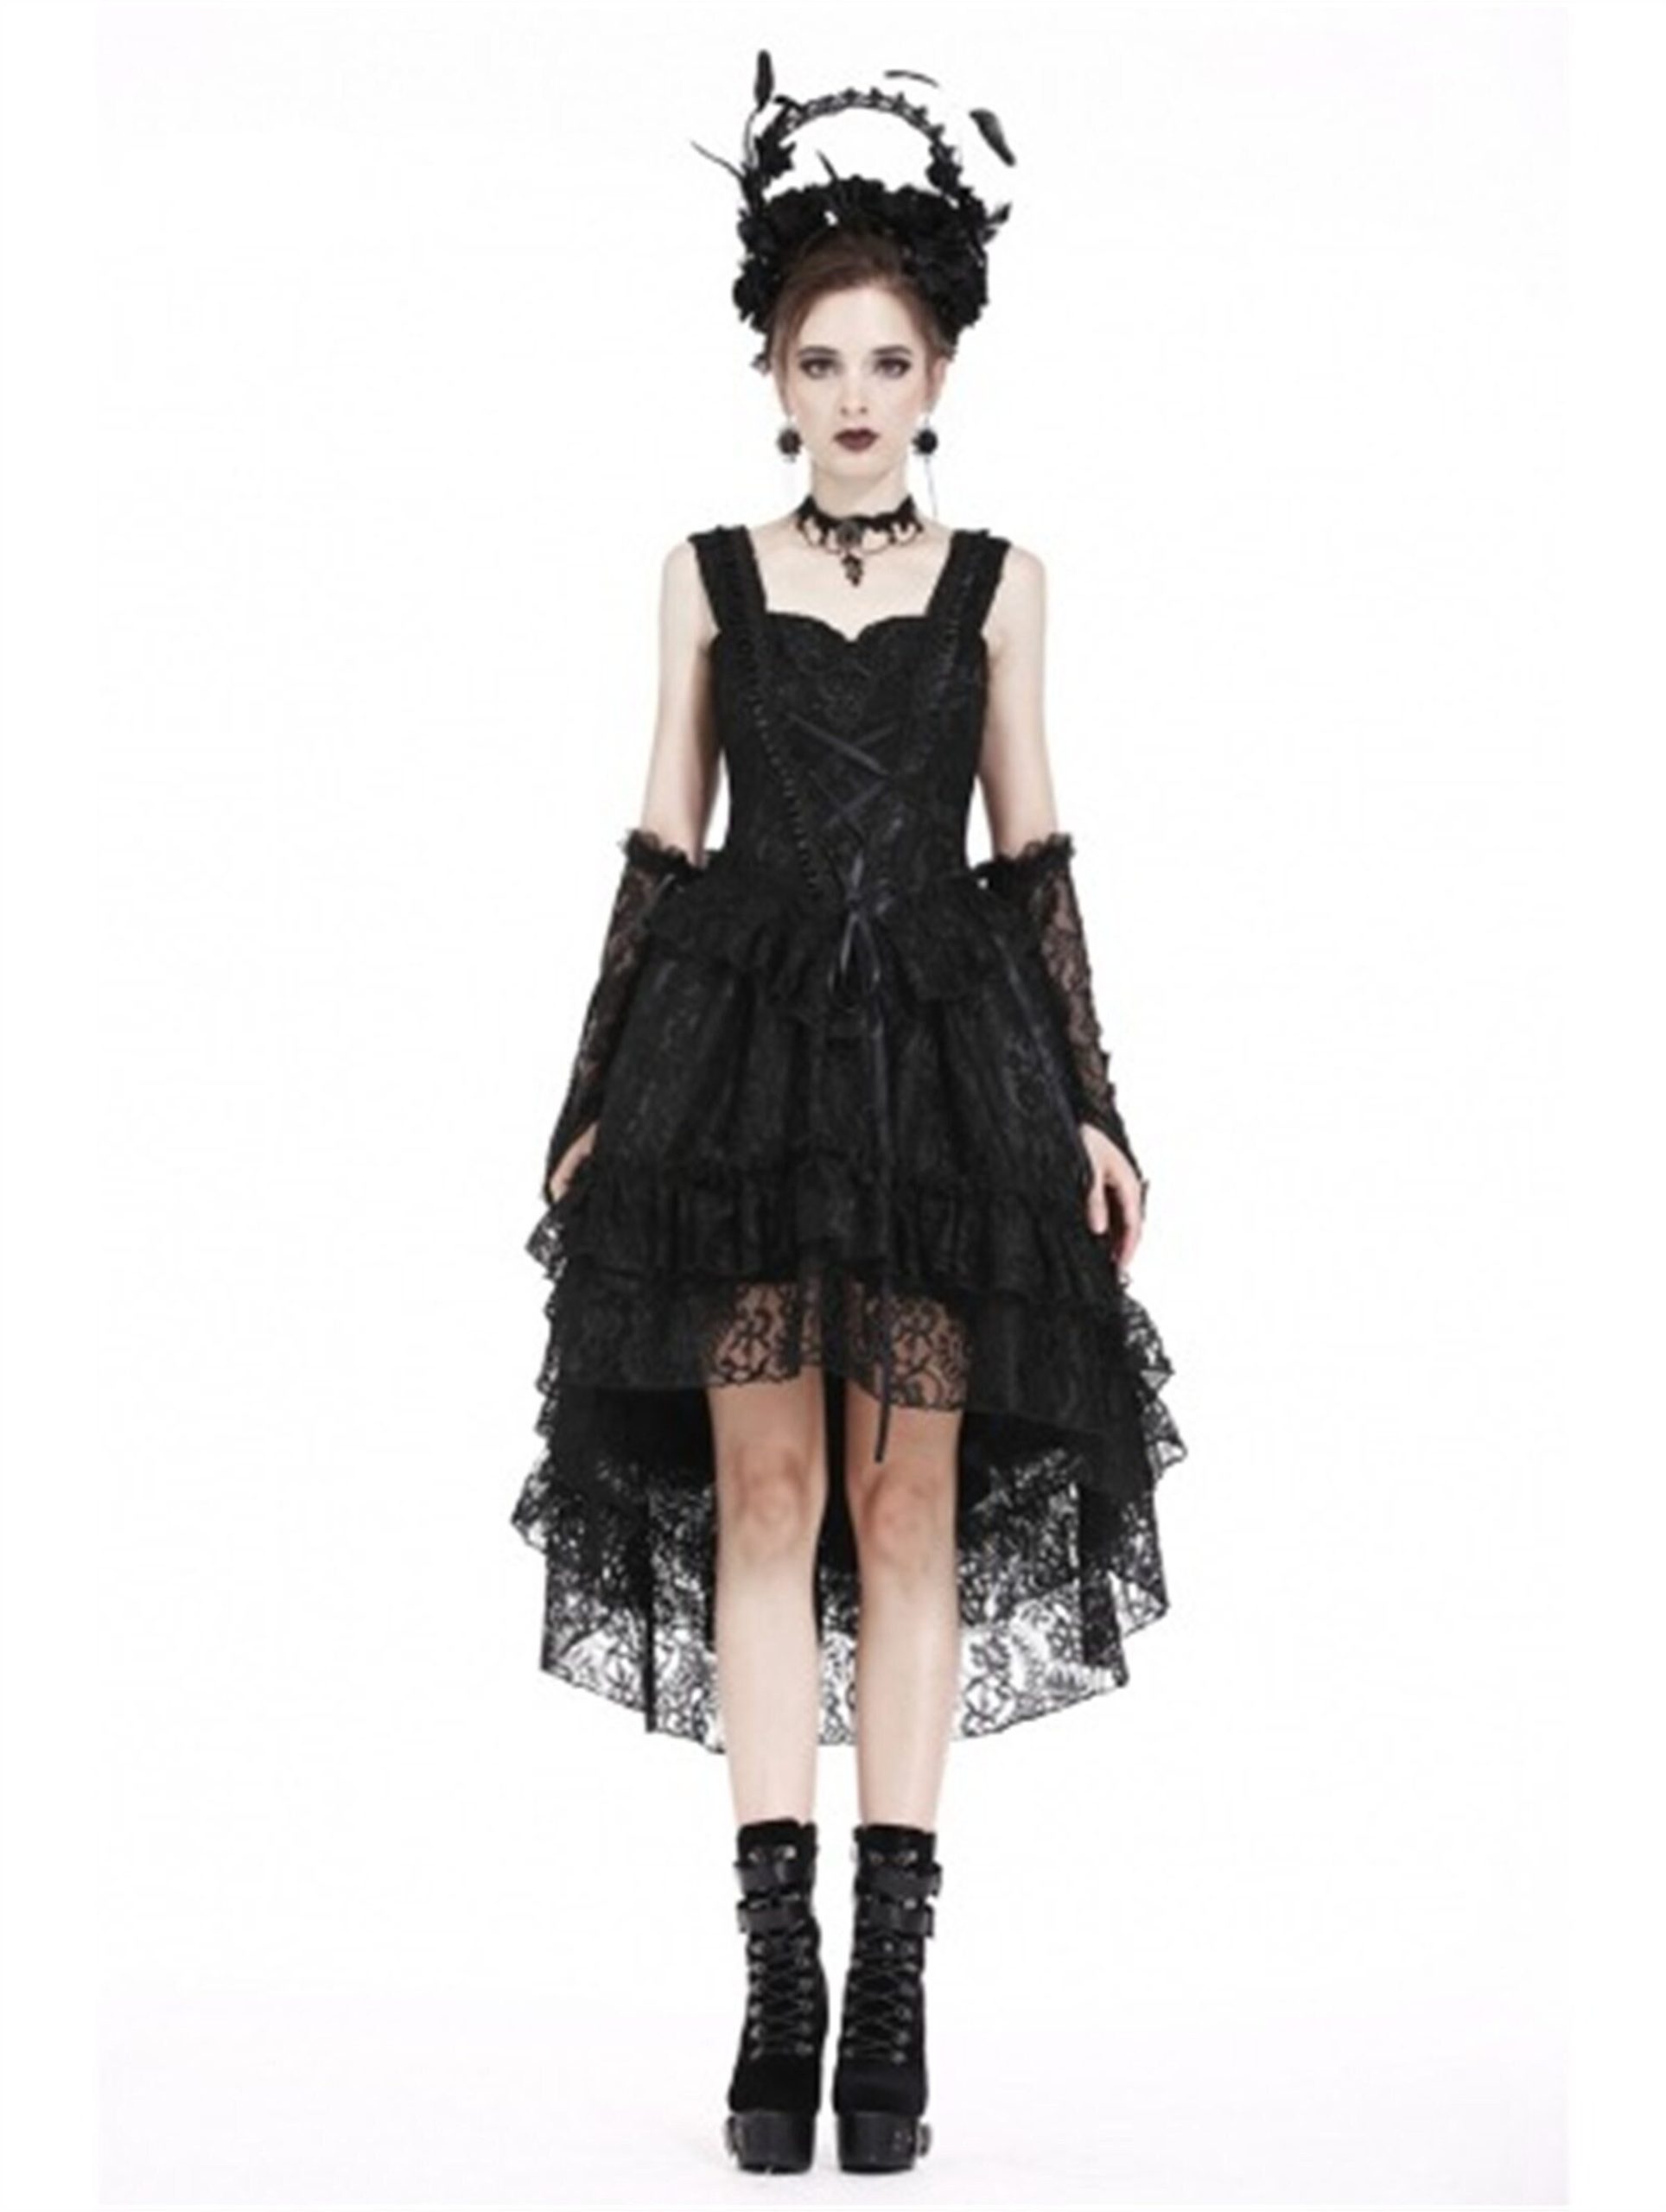 Dark Gothic Ruffled Double Lace Tie Dress Goth Sexy Rose Lace Dress Chiffon Perspective Dress Tulle Slim Fit Mermaid Dress Vintage Dress